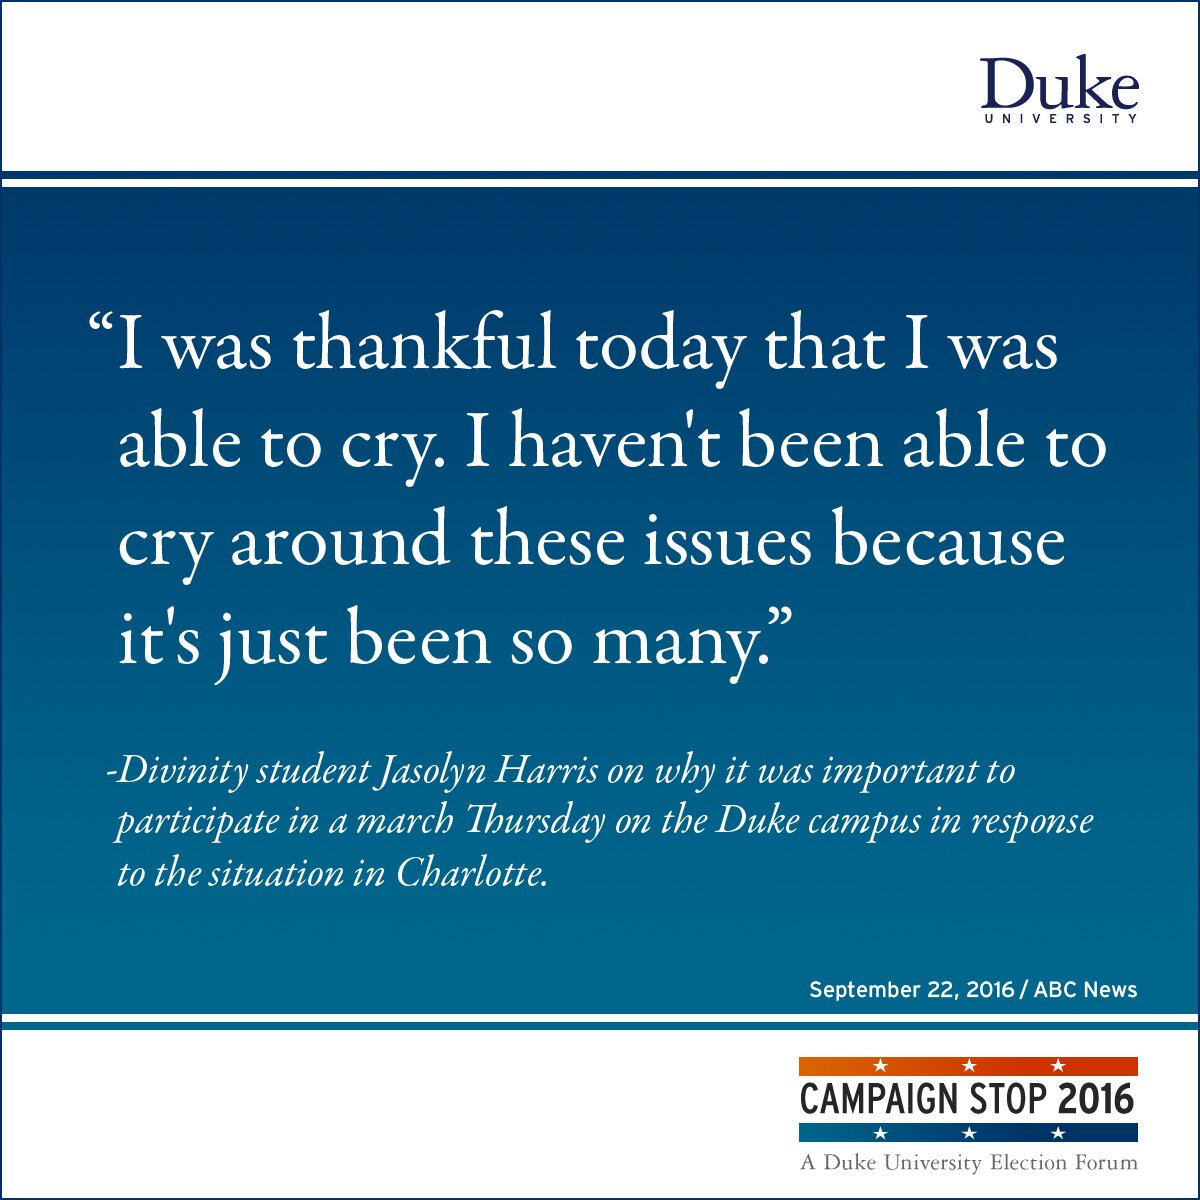 “I was thankful today that I was able to cry. I haven